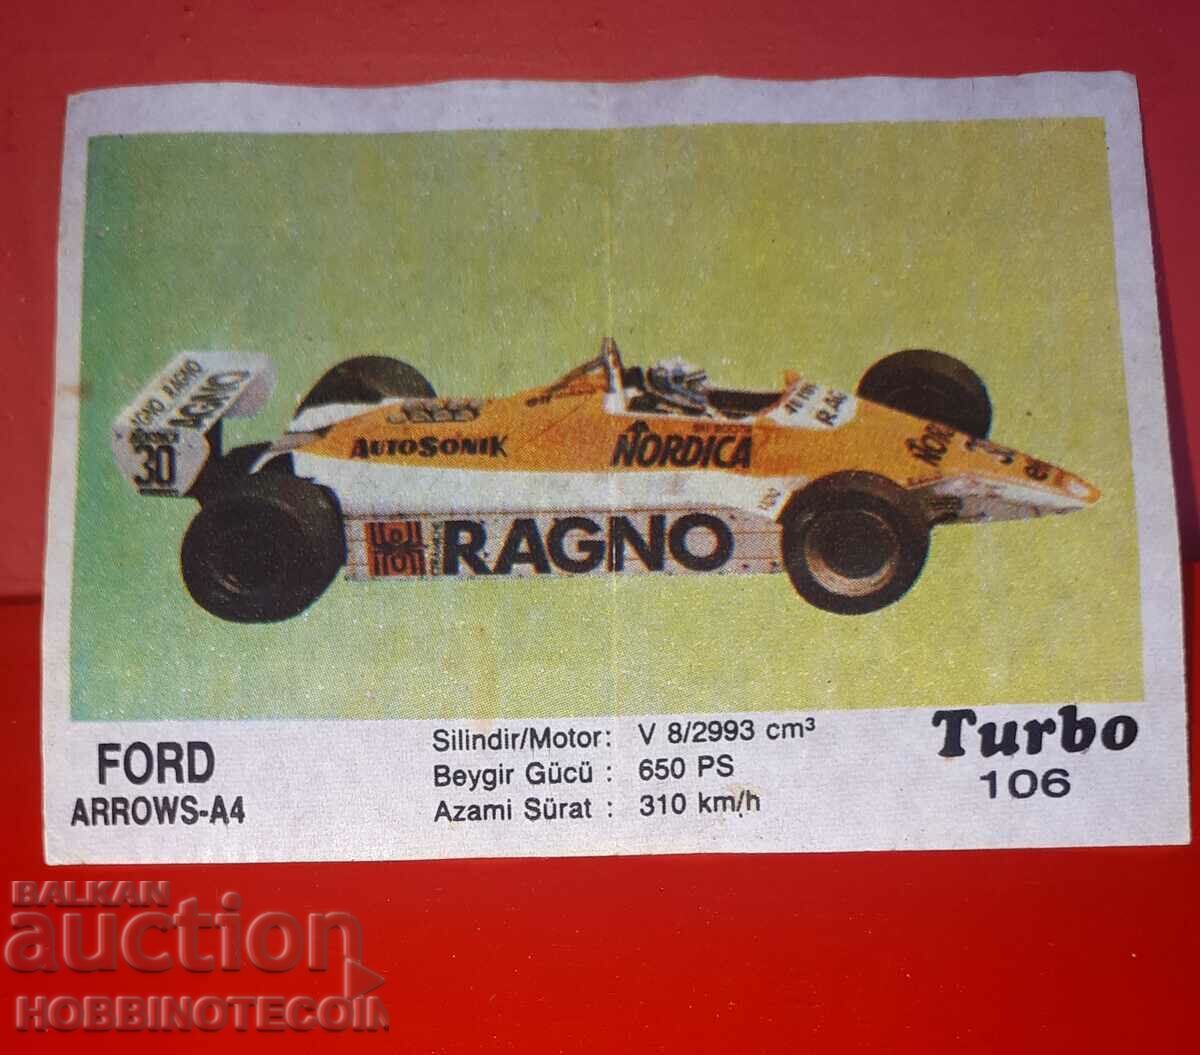 PICTURE TURBO TURBO N 106 FORD ARROVWS - A4 FORMULA 1